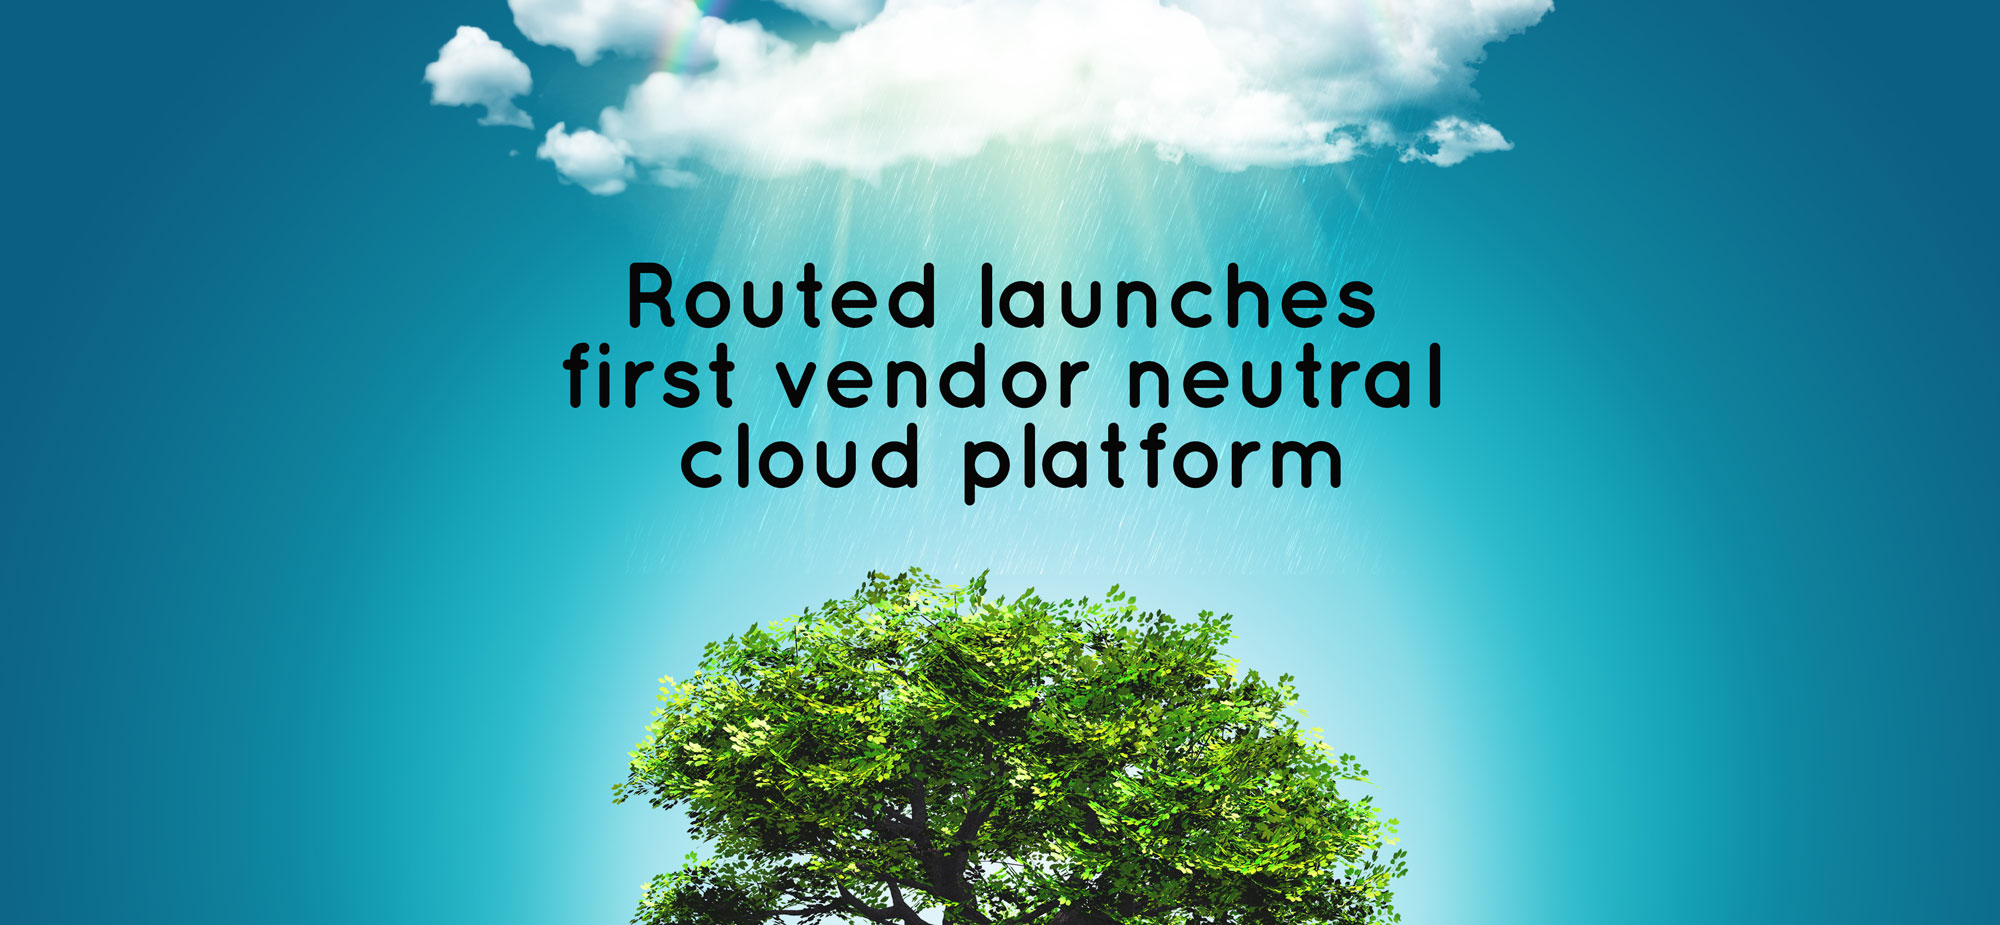 Organic growth of cloud expected to increase , Routed